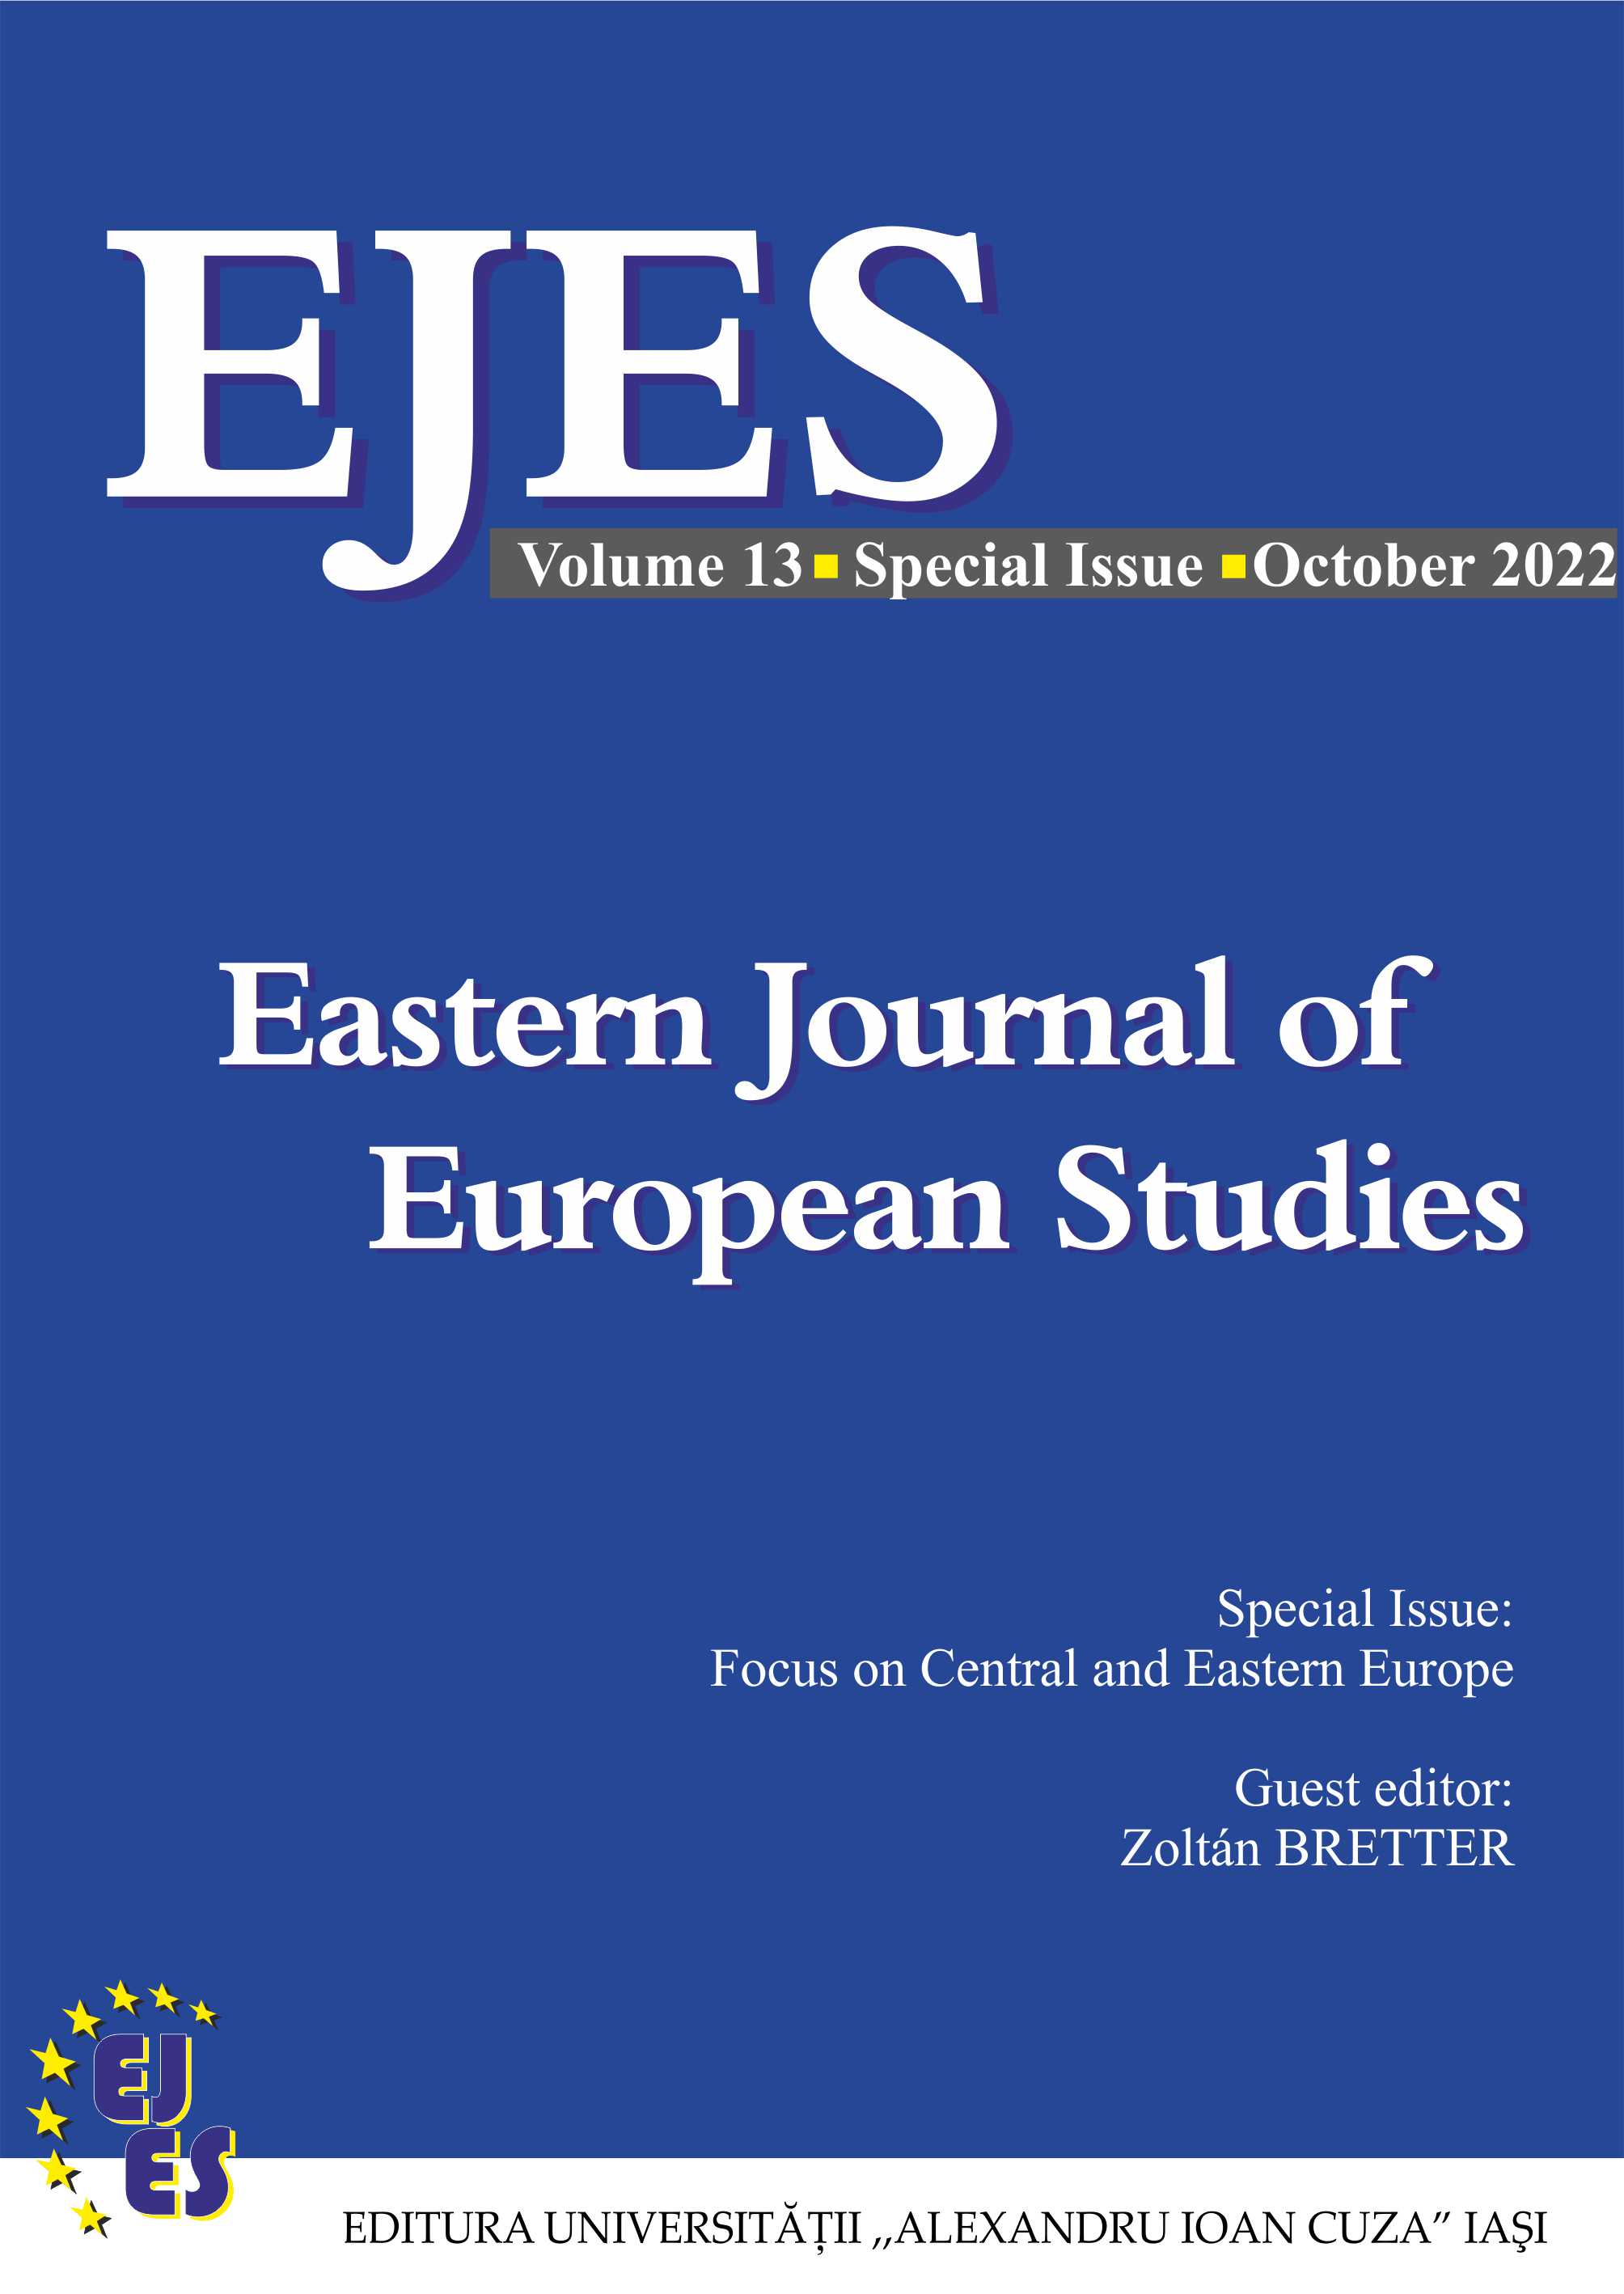 Hybrid foreign policies in the EU’s Eastern flank: adaptive diplomacy Cover Image